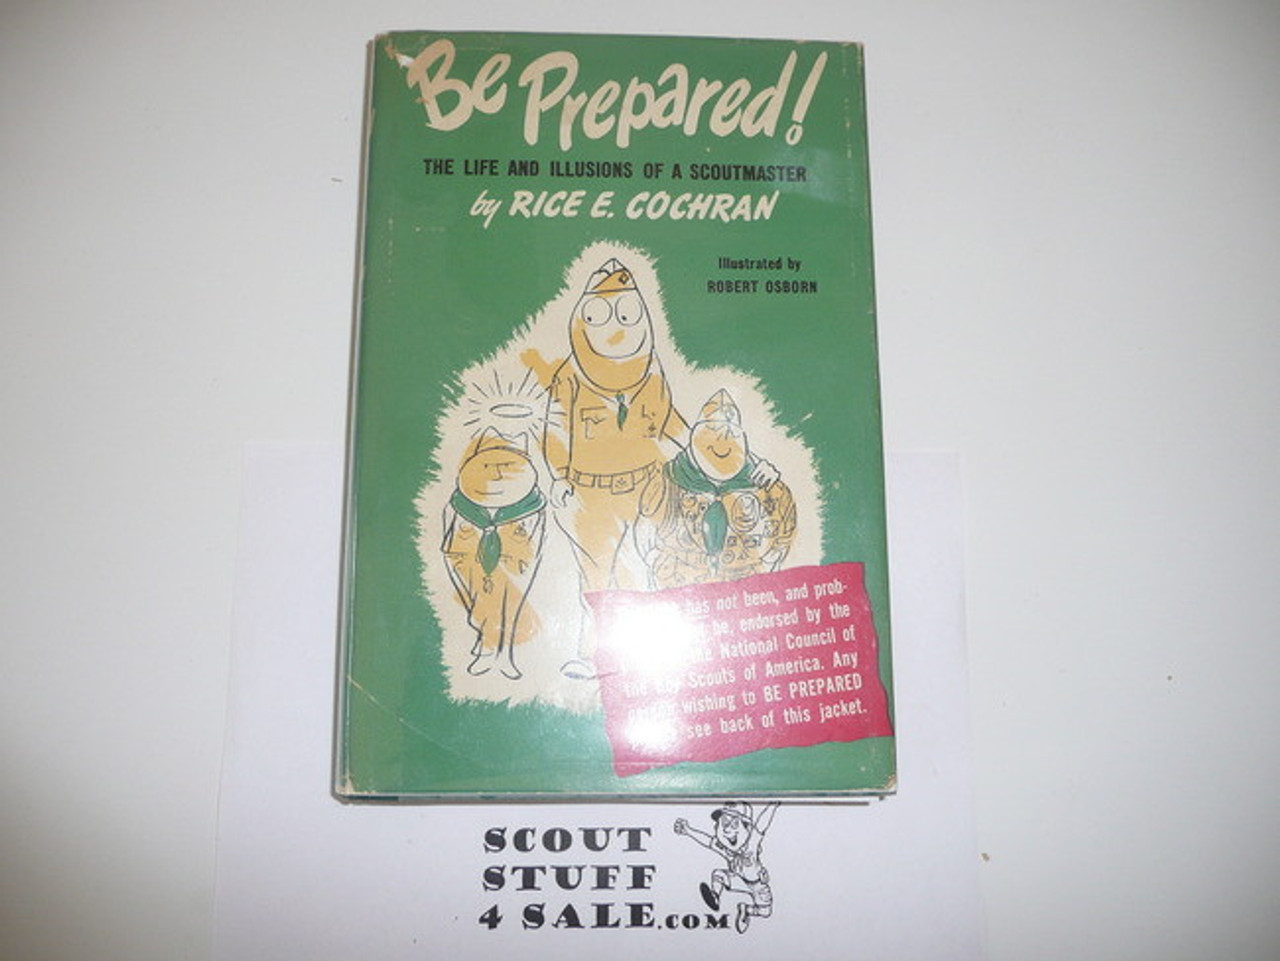 1952 Be Prepared, The Life and Illusions of a Scoutmaster, With Dust Jacket, By Rice Cochran(Keith Monroe), MINT Condition